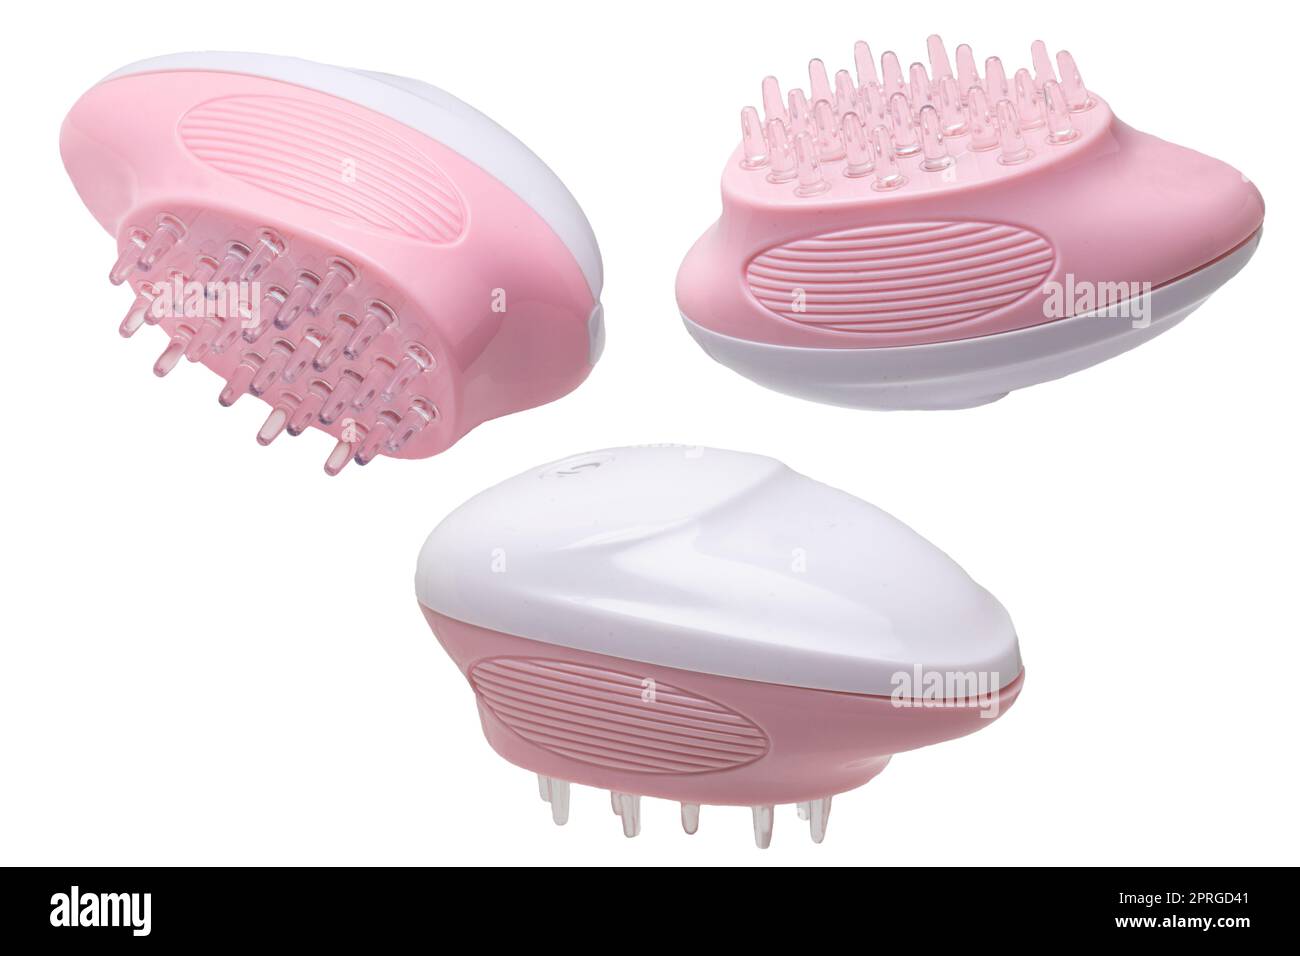 Close up of three battery operated scalp massage brushes, shampoo brushes or scalp massager for exfoliating and massaging the scalp. Beauty and health concept. Stock Photo